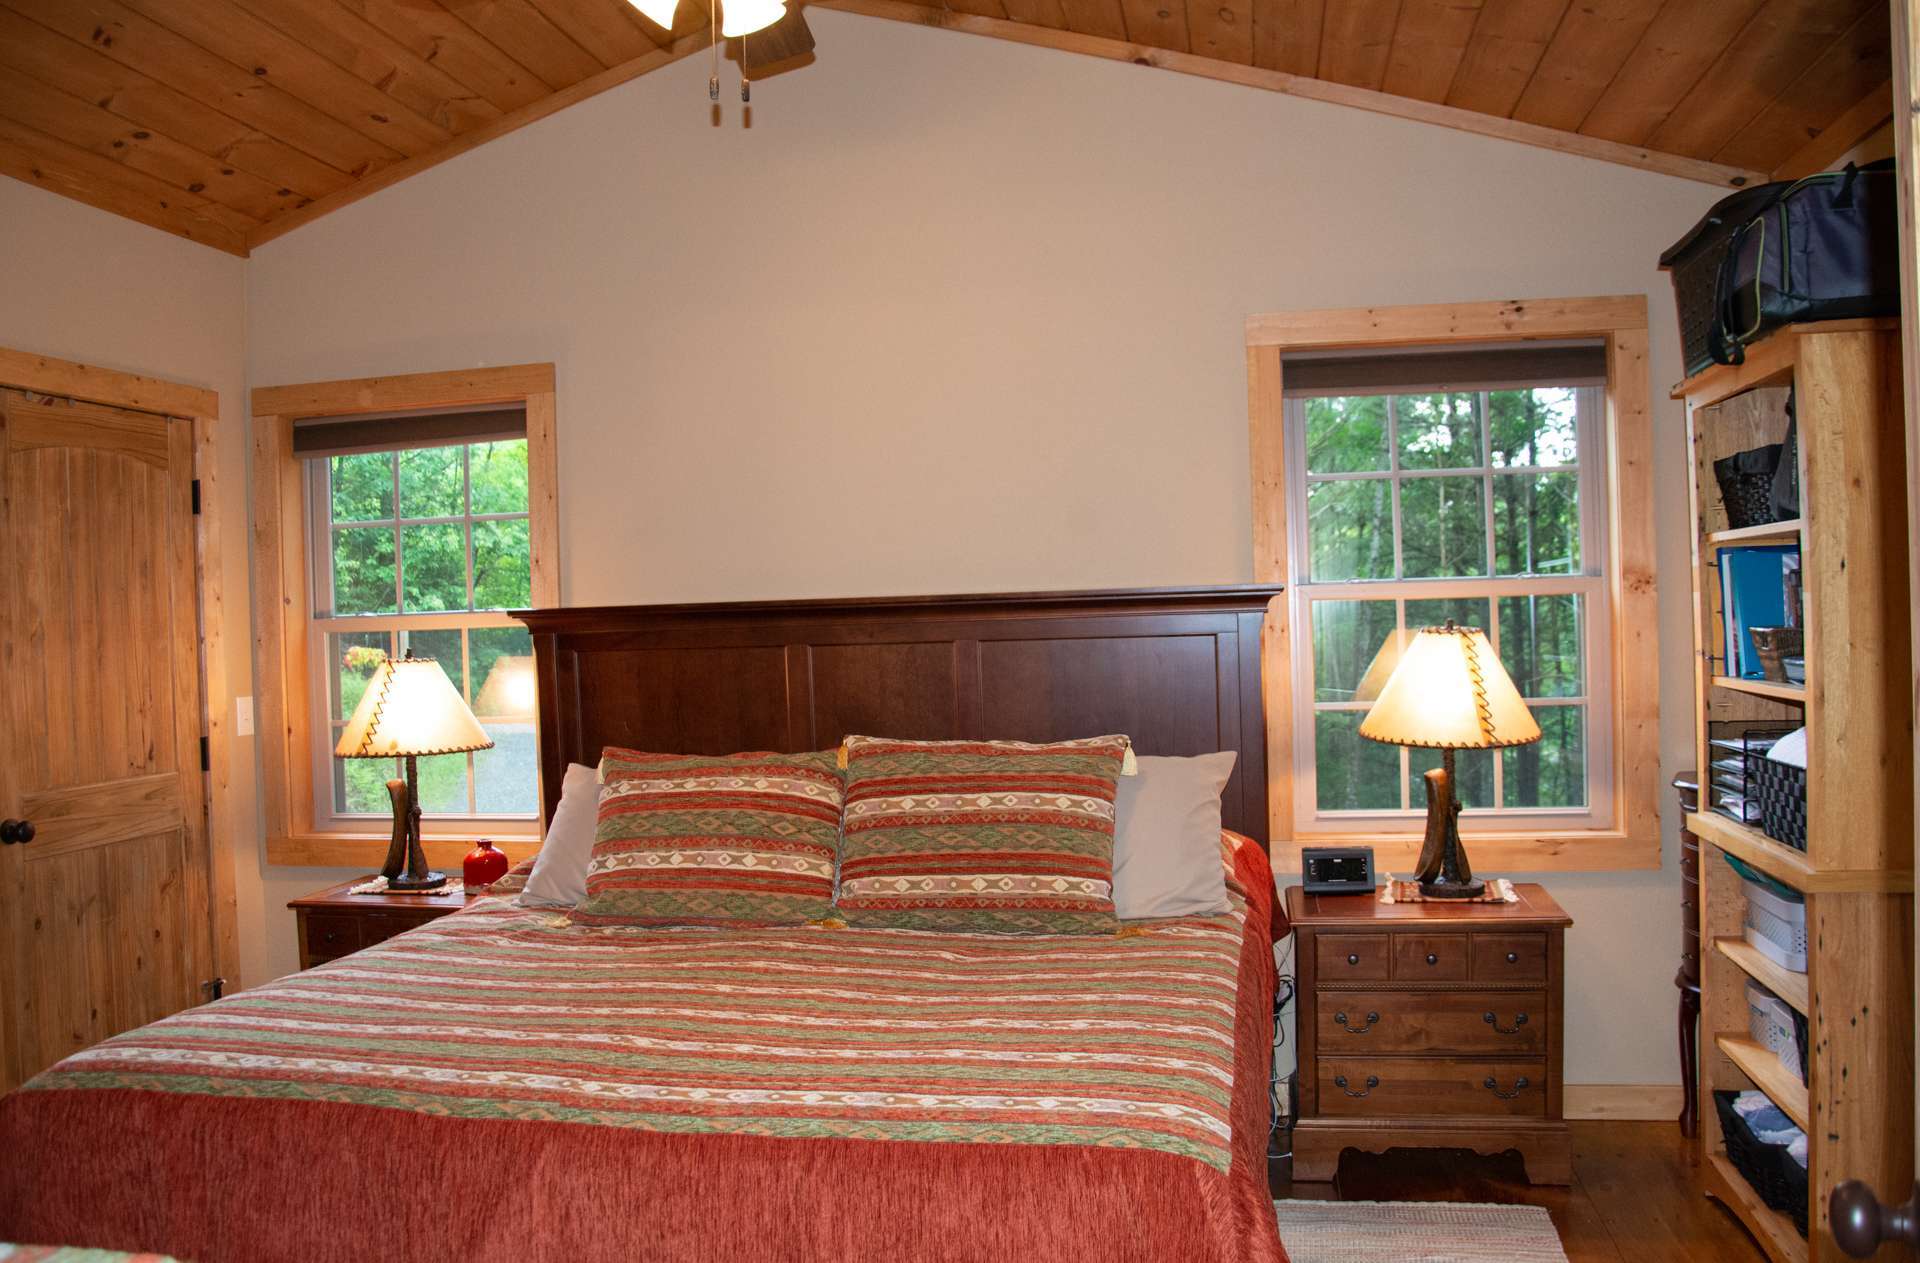 The Master bedroom is located on the main level and includes his and her closets and private access to the back deck.